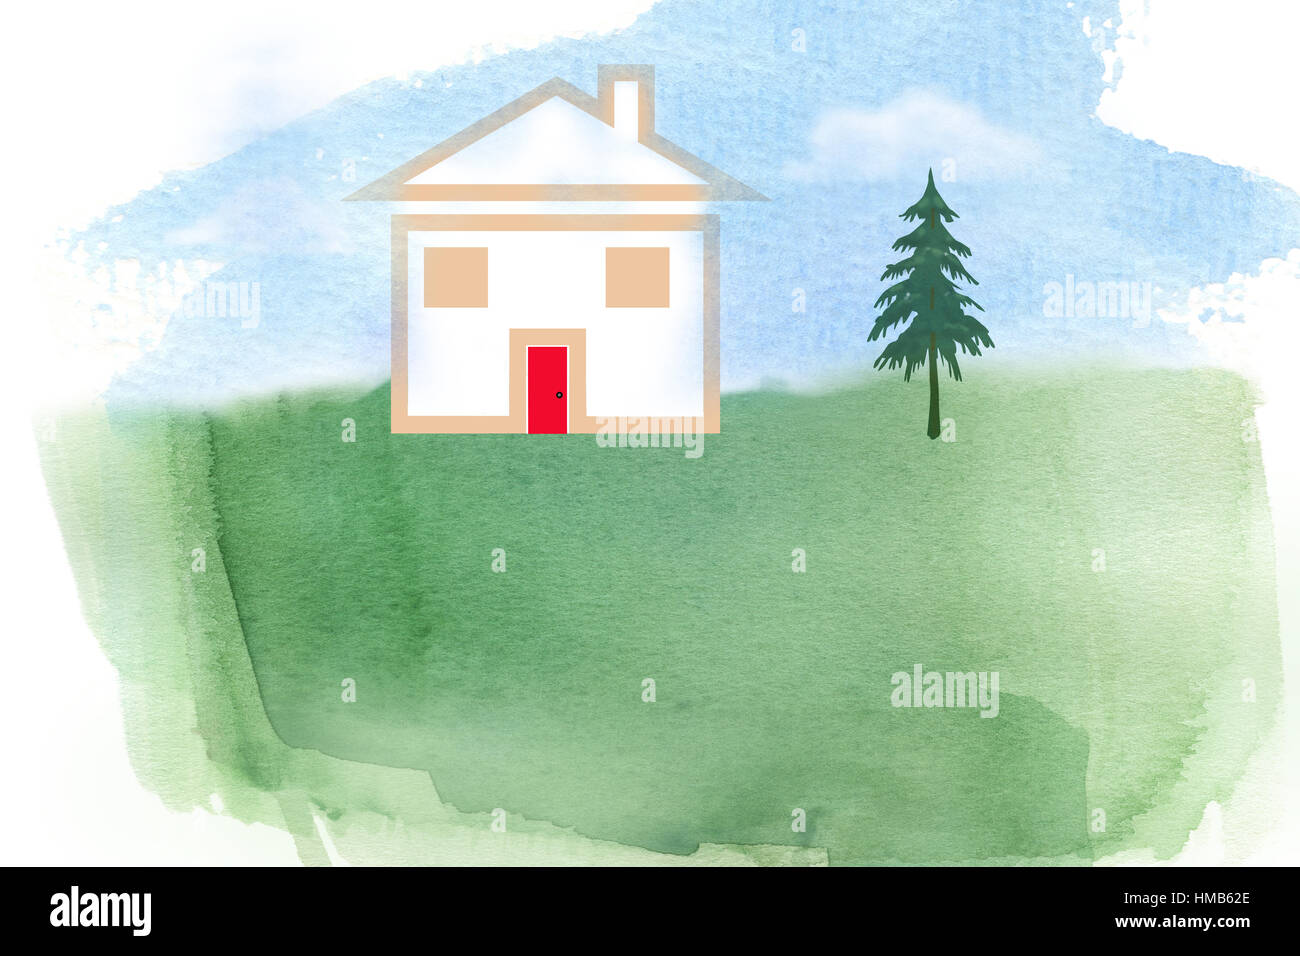 An illustration of a house. Wording supplied by you. Conceptual, home ownership, real estate, housing market, home buying. Watercolor texture used. Stock Photo